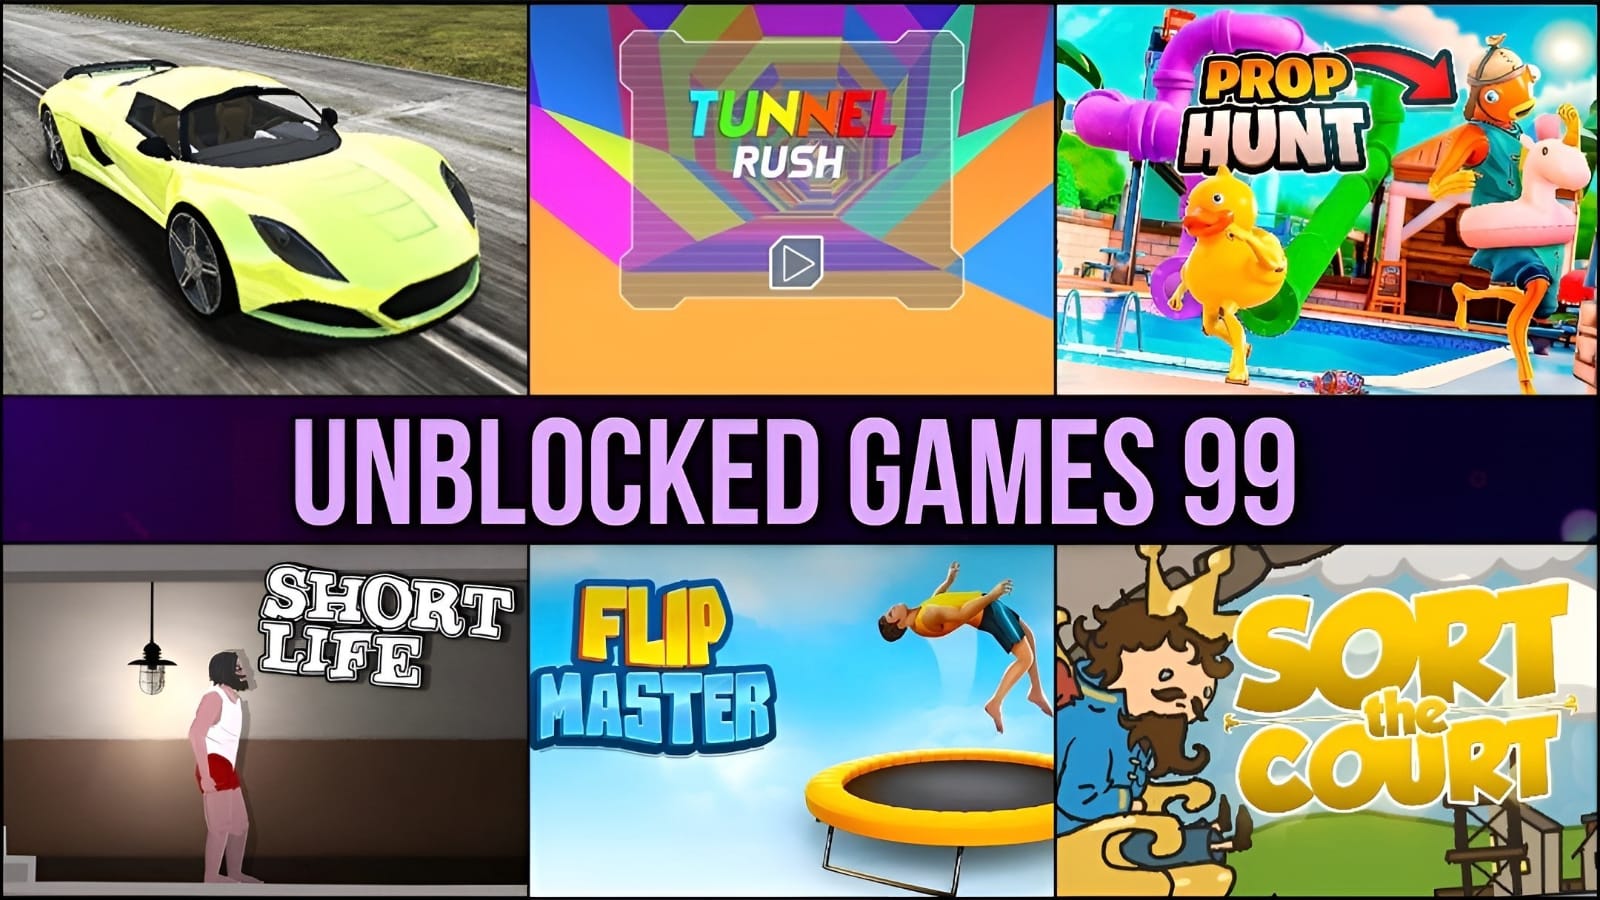 Unblocked Games 66 EZ: Your Gateway to Unrestricted Gaming Fun